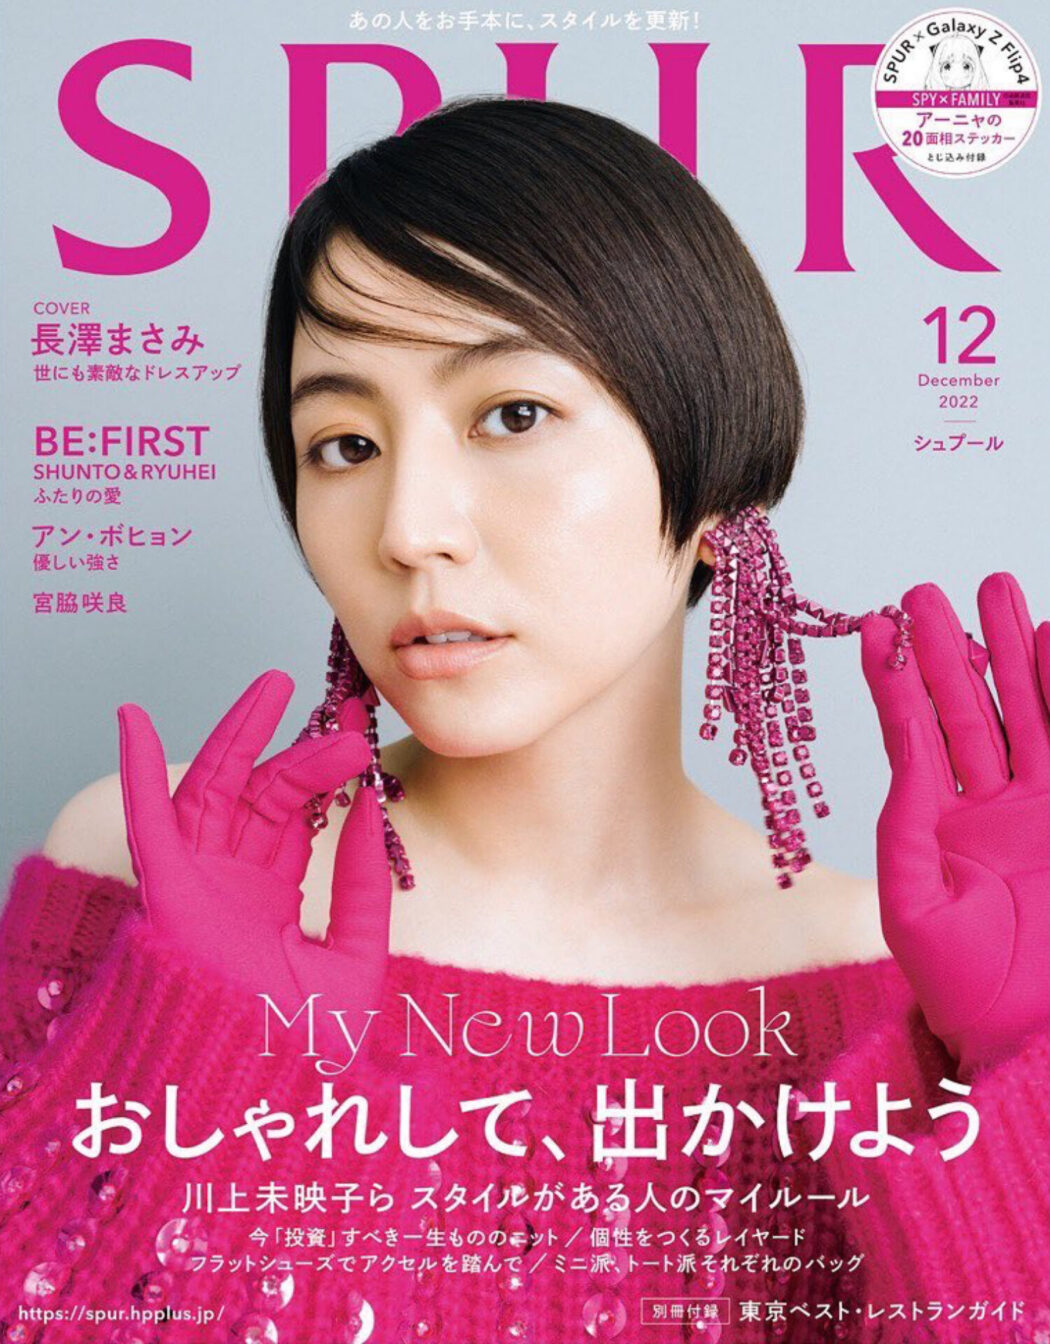 Make up by Yumi Endo
SPUR December issue 2022